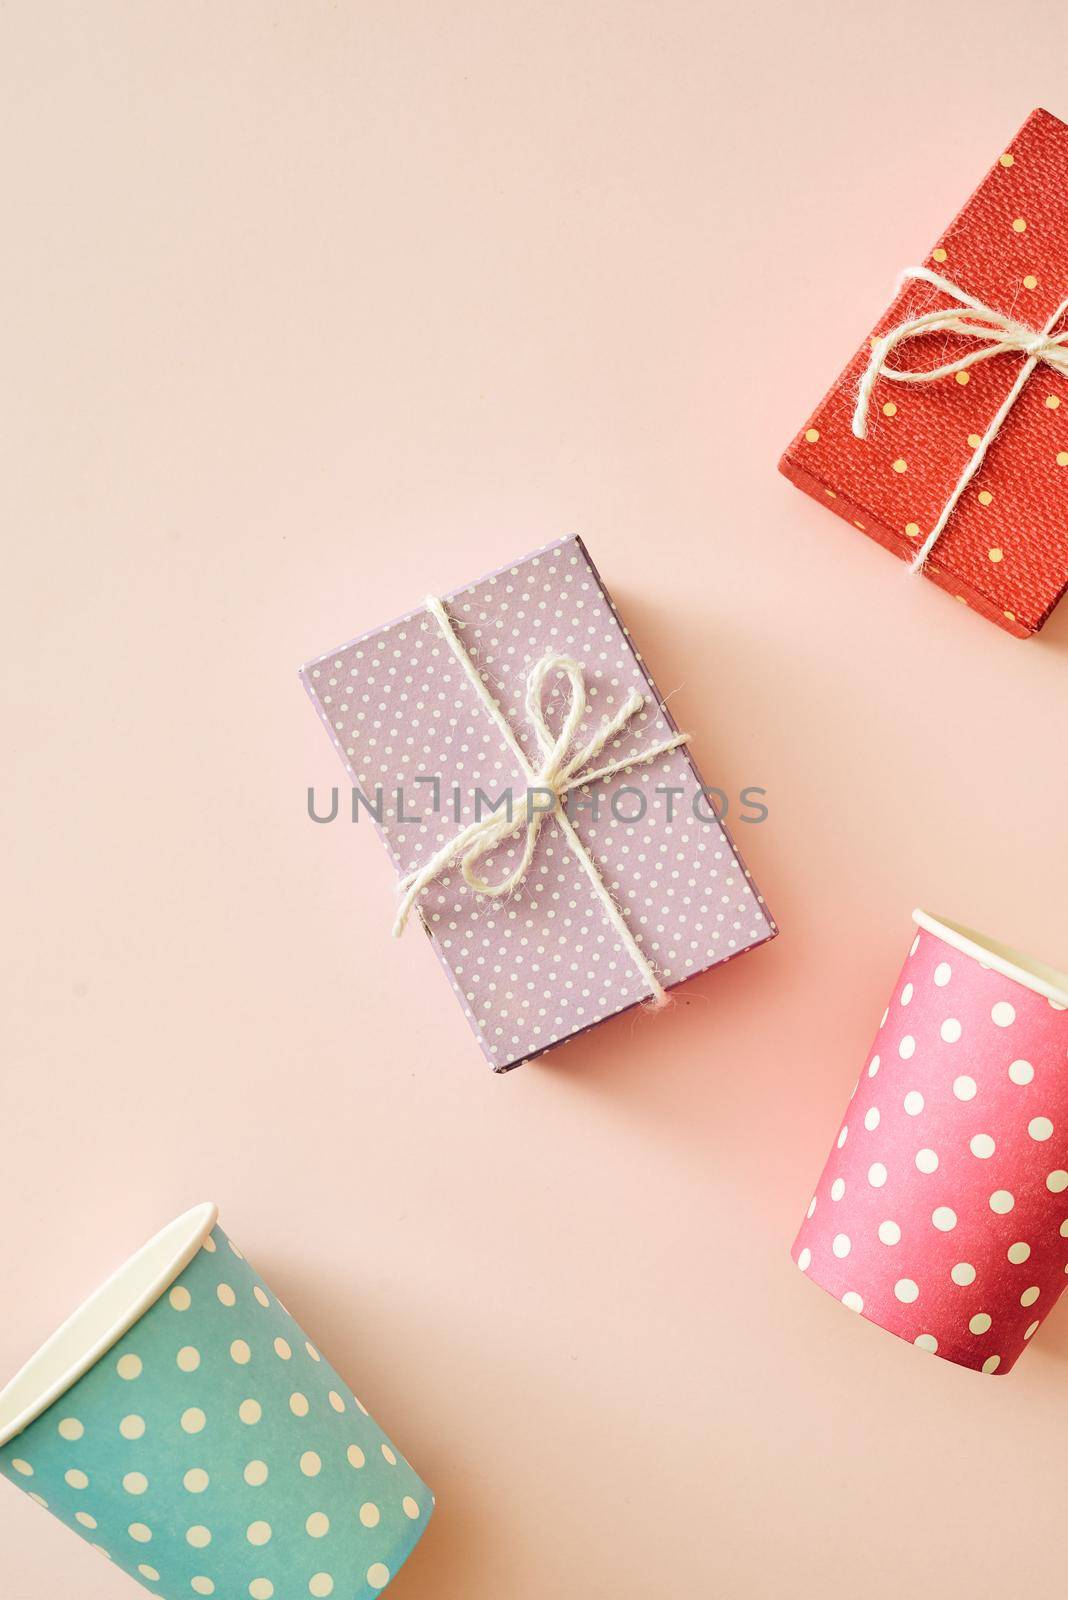 Fashion party background with colorful gift boxes on pink background